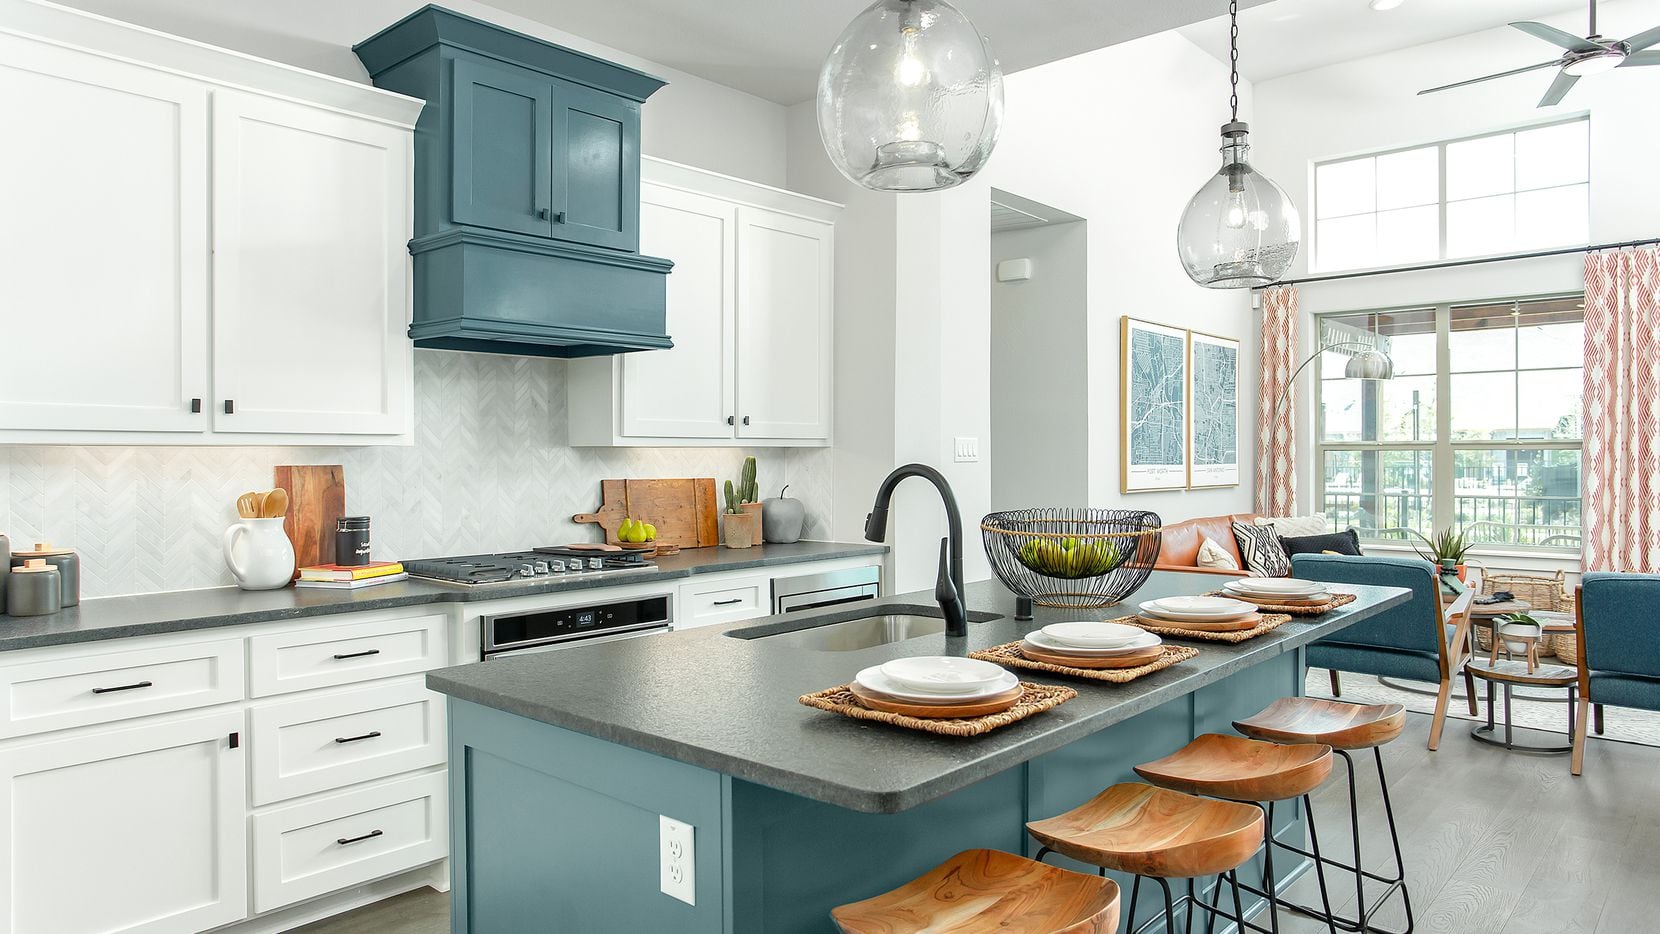 Move-in-ready villa homes by Grenadier Homes are underway and priced from the mid-$300s in...